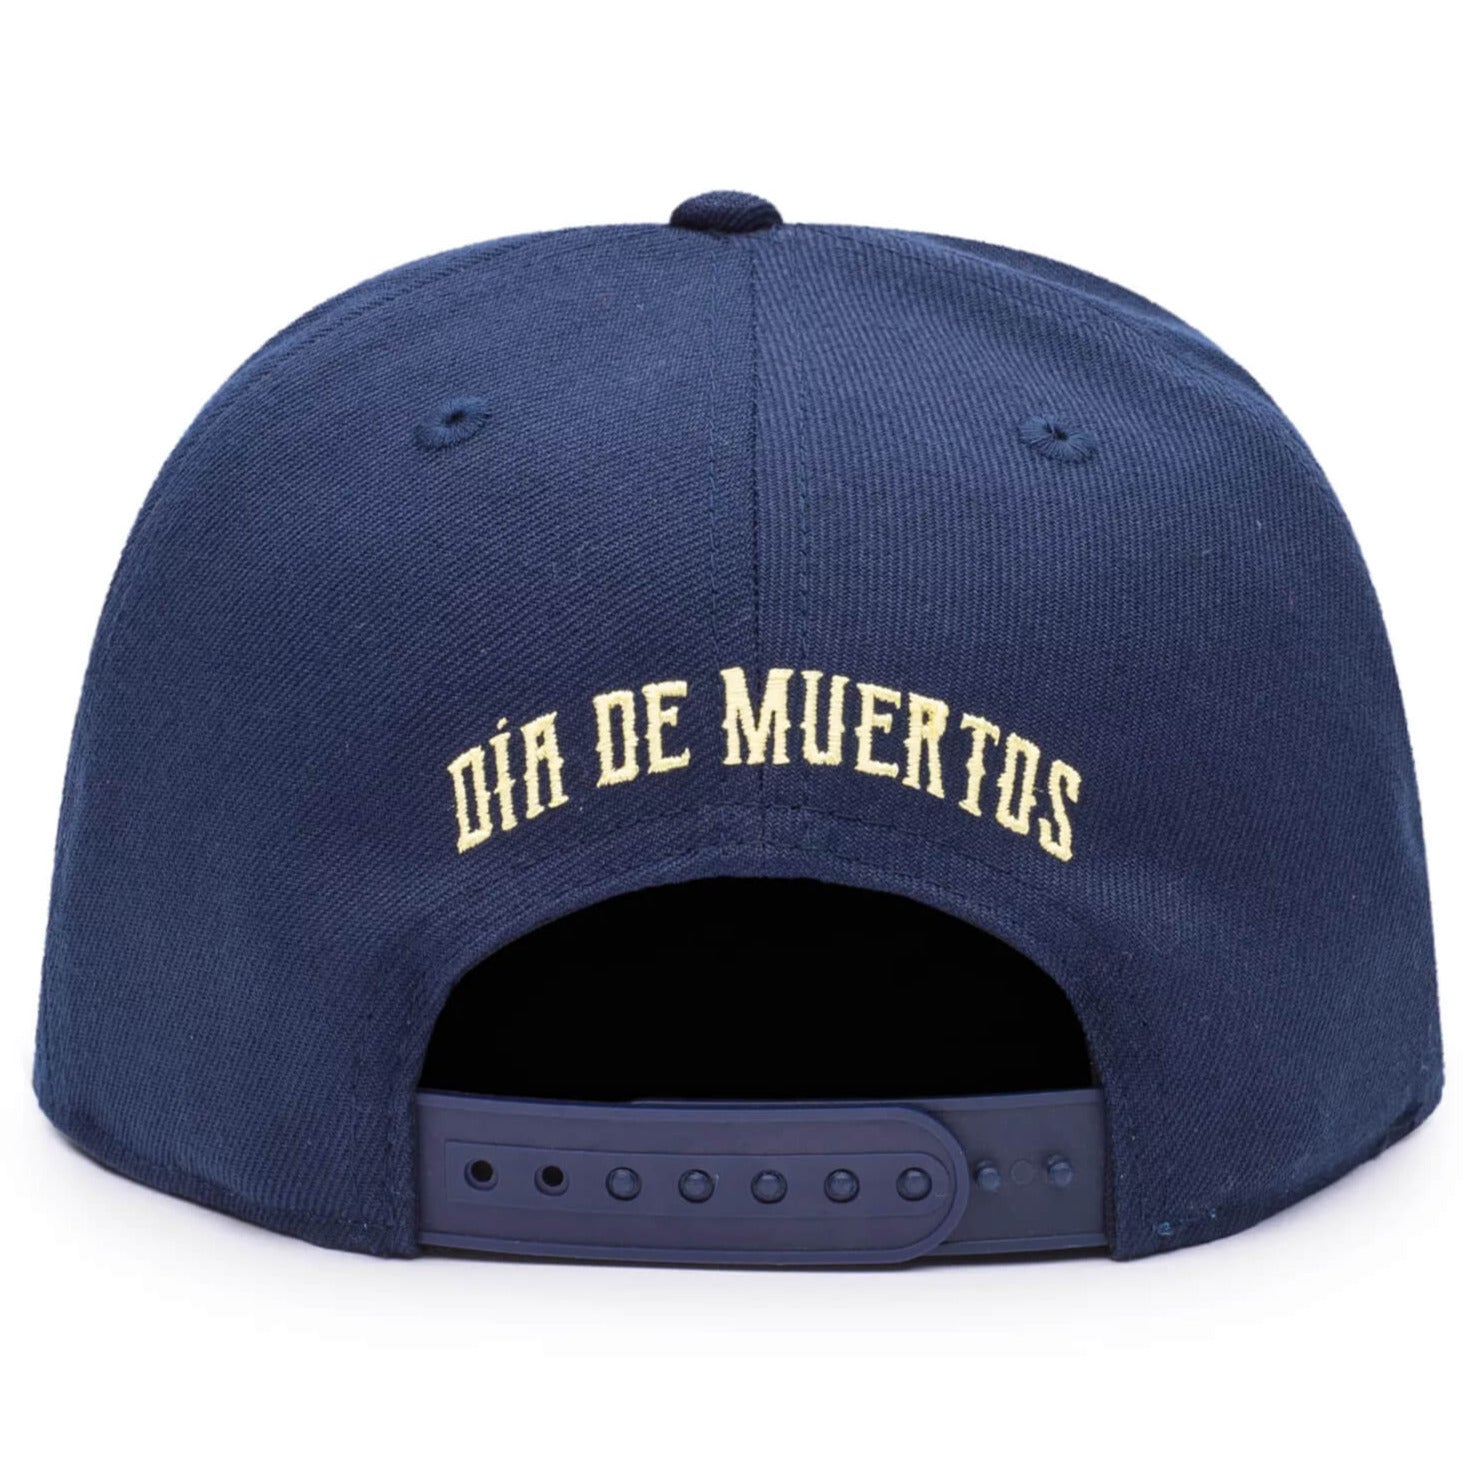 FI Collection Club America Day of the Dead Skull Snapback Hat -Navy-Yellow (Back)